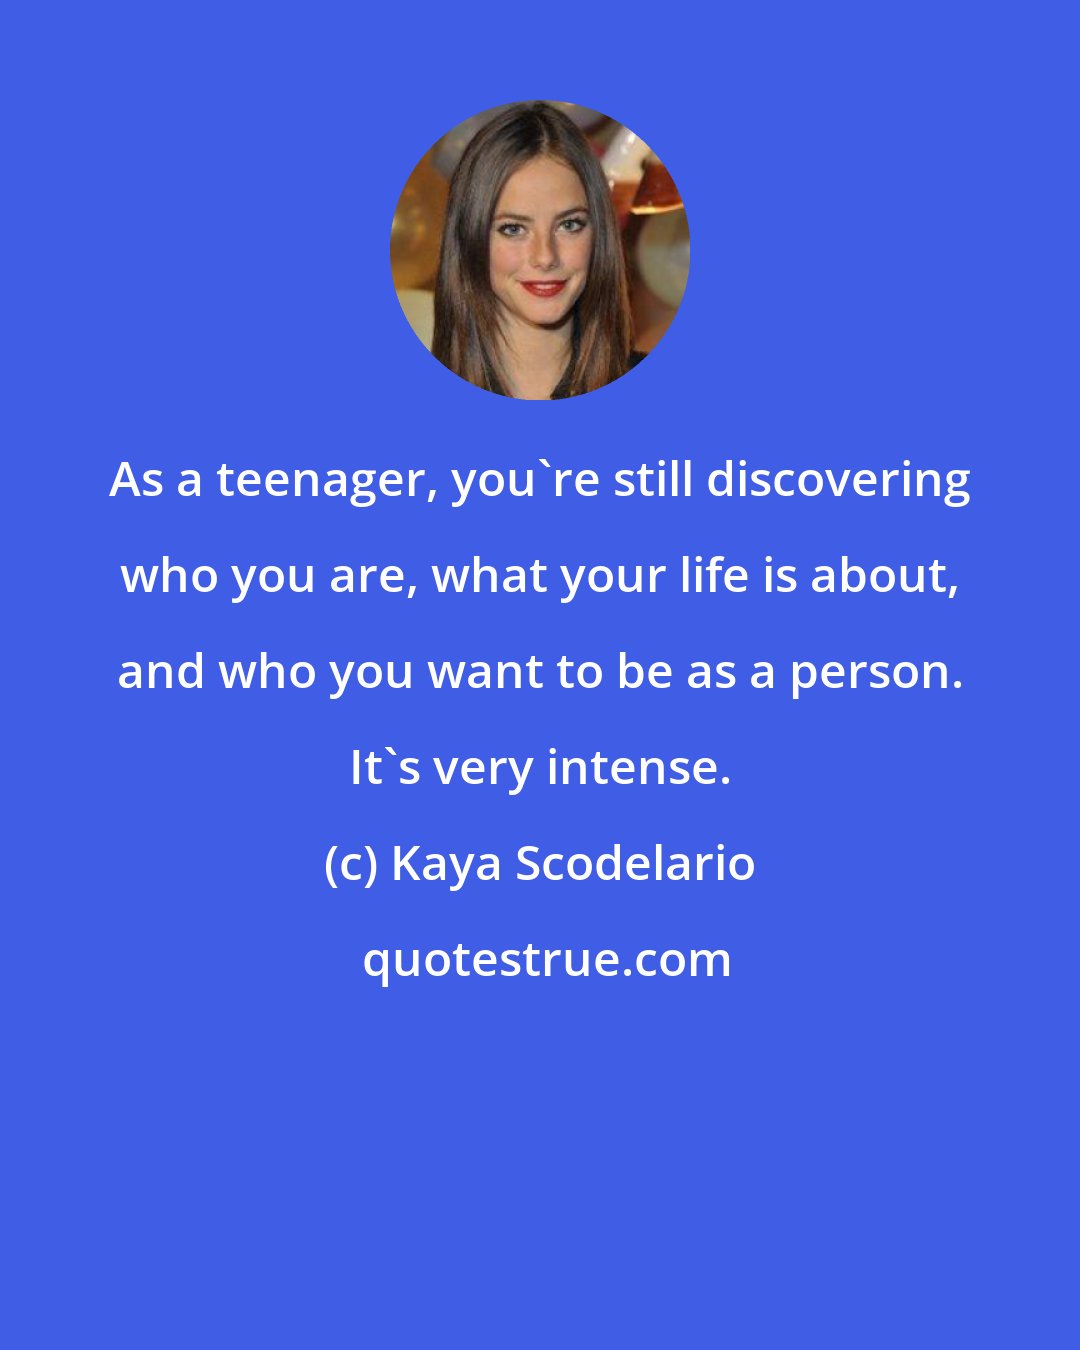 Kaya Scodelario: As a teenager, you're still discovering who you are, what your life is about, and who you want to be as a person. It's very intense.